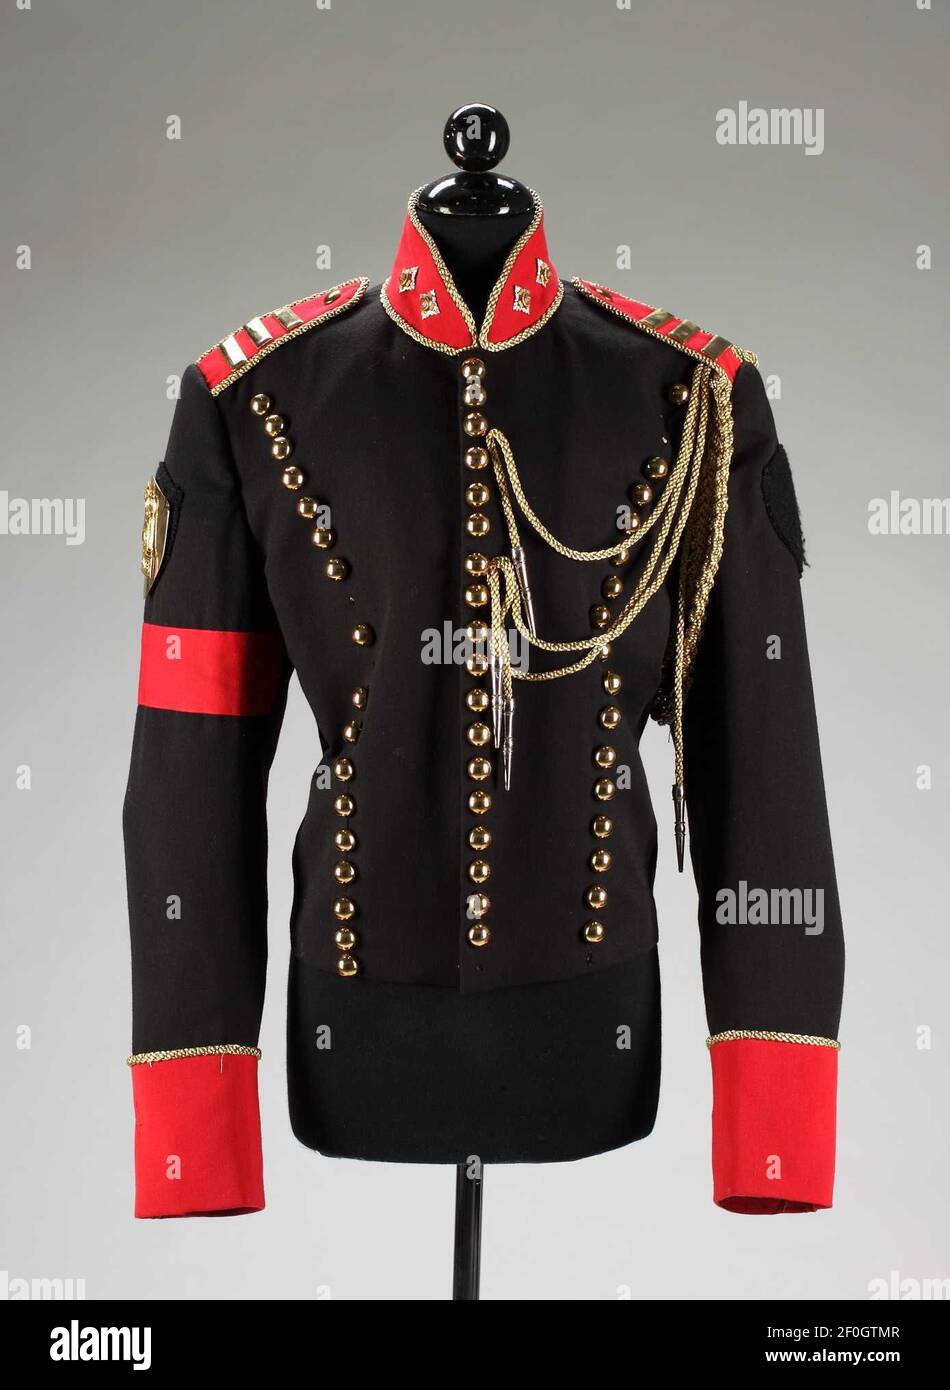 10 November 2010 - New York, NY - A Michael Jackson black jacket made by  Tompkins and Bush with red collar, epaulettes, armband and cuffs. Gold  accents throughout including braiding, three lines